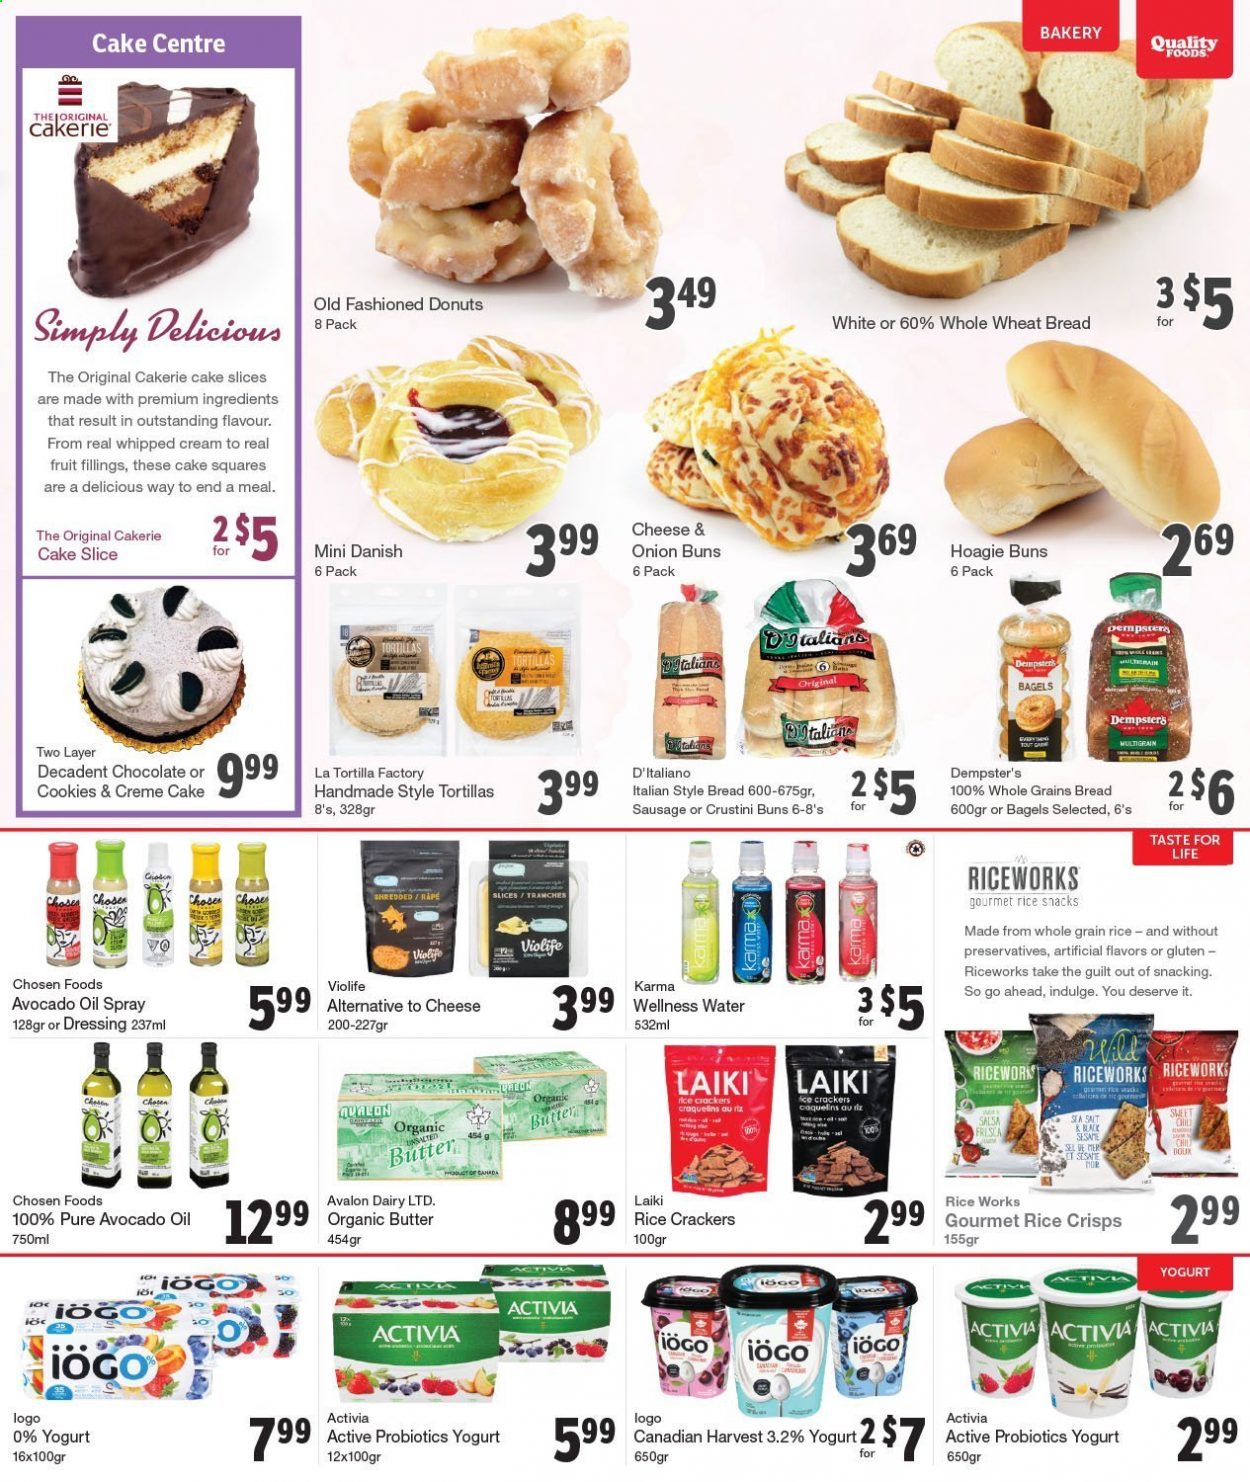 thumbnail - Quality Foods Flyer - April 26, 2021 - May 02, 2021 - Sales products - bagels, tortillas, wheat bread, cake, buns, cake squares, donut, cream pie, onion, sausage, yoghurt, probiotic yoghurt, Activia, butter, whipped cream, cookies, chocolate, snack, crackers, rice crackers, rice crisps, whole grain rice, dressing, salsa, avocado oil, oil, probiotics. Page 6.